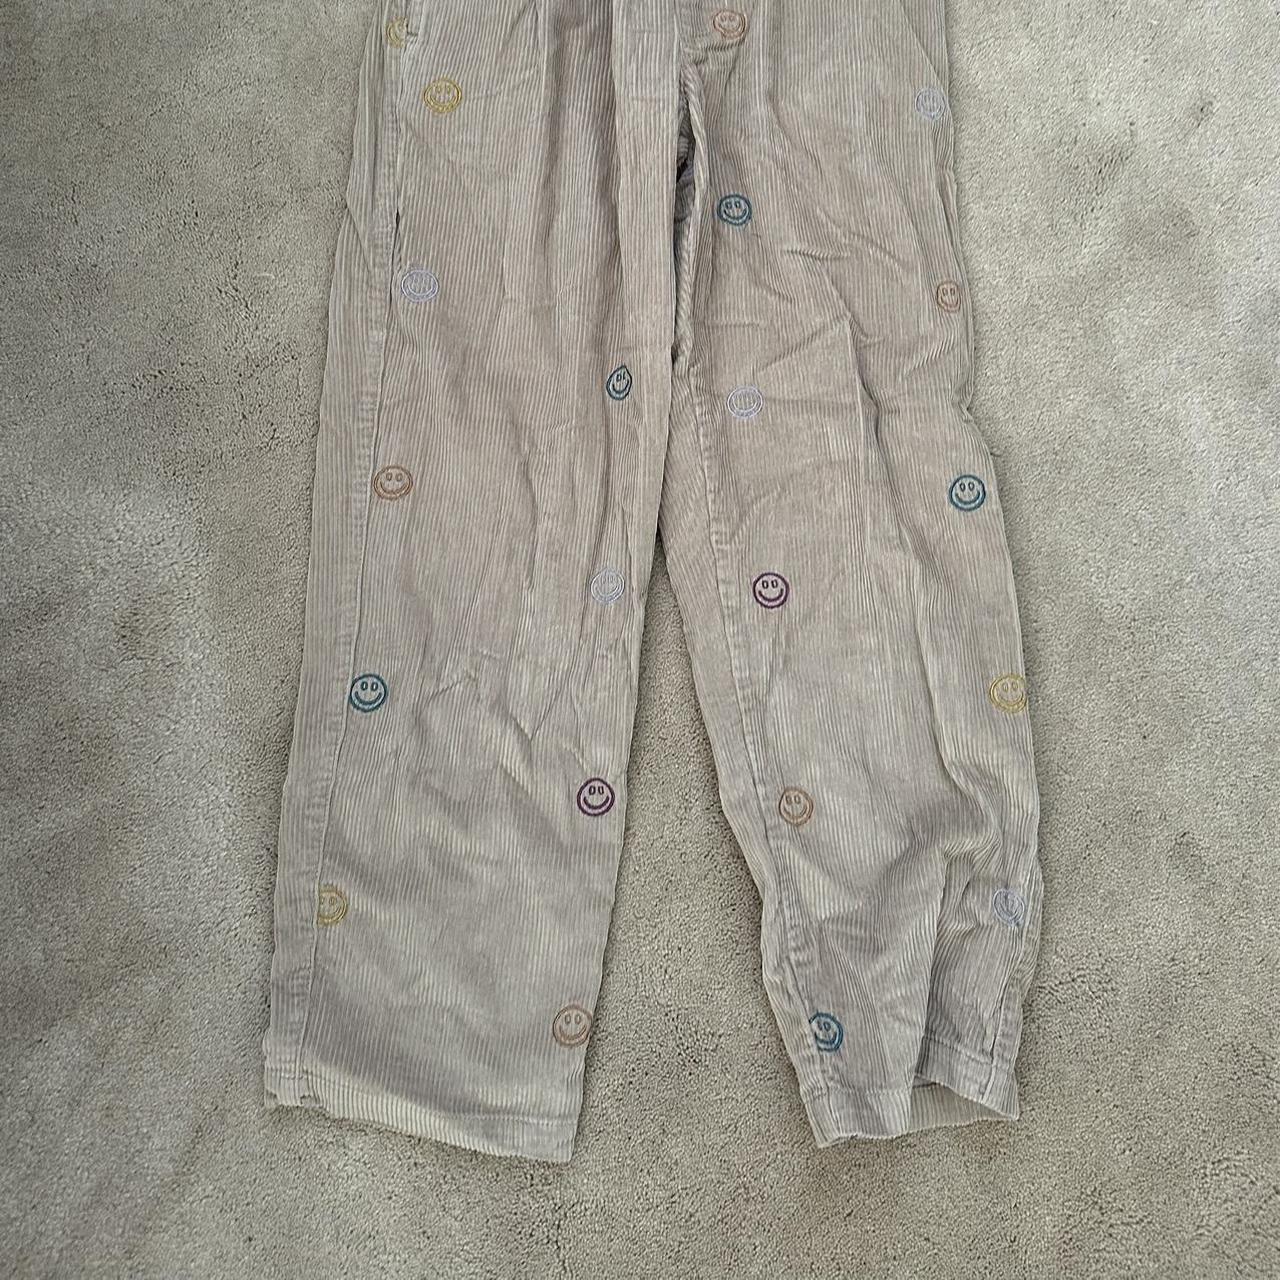 Corduroy tan smiley face pants from urban outfitters - Depop